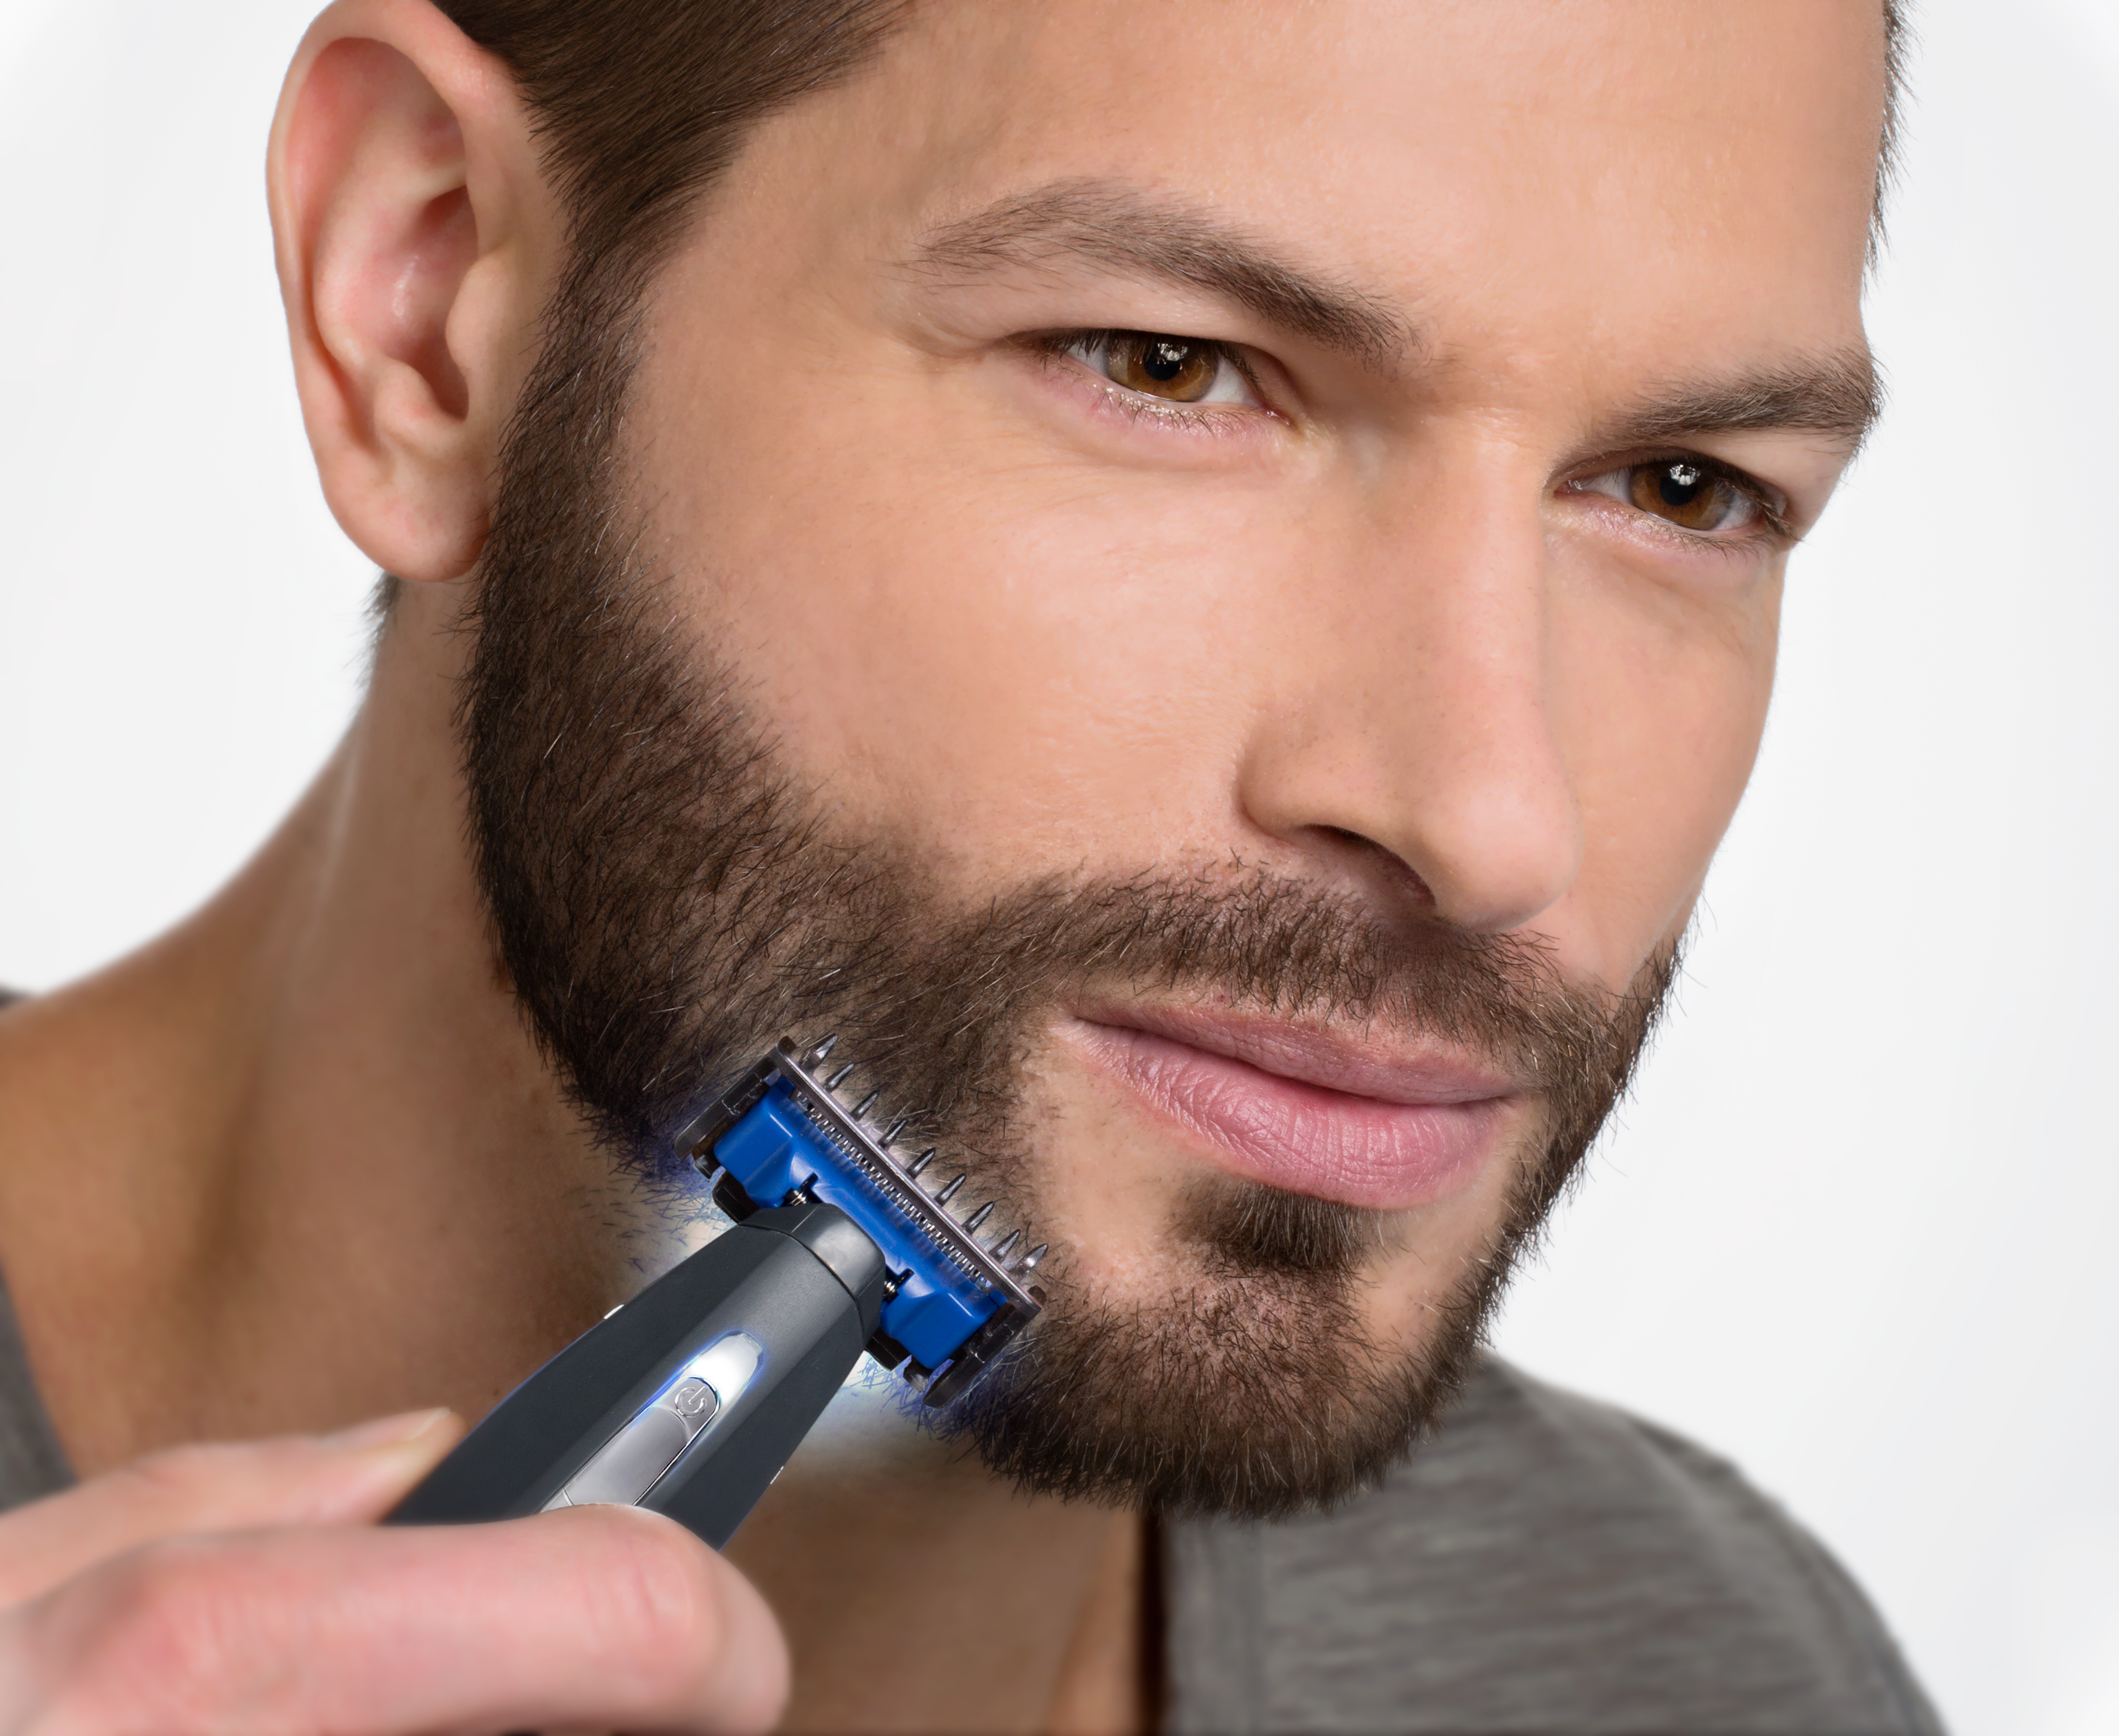 micro touch solo shaver reviews